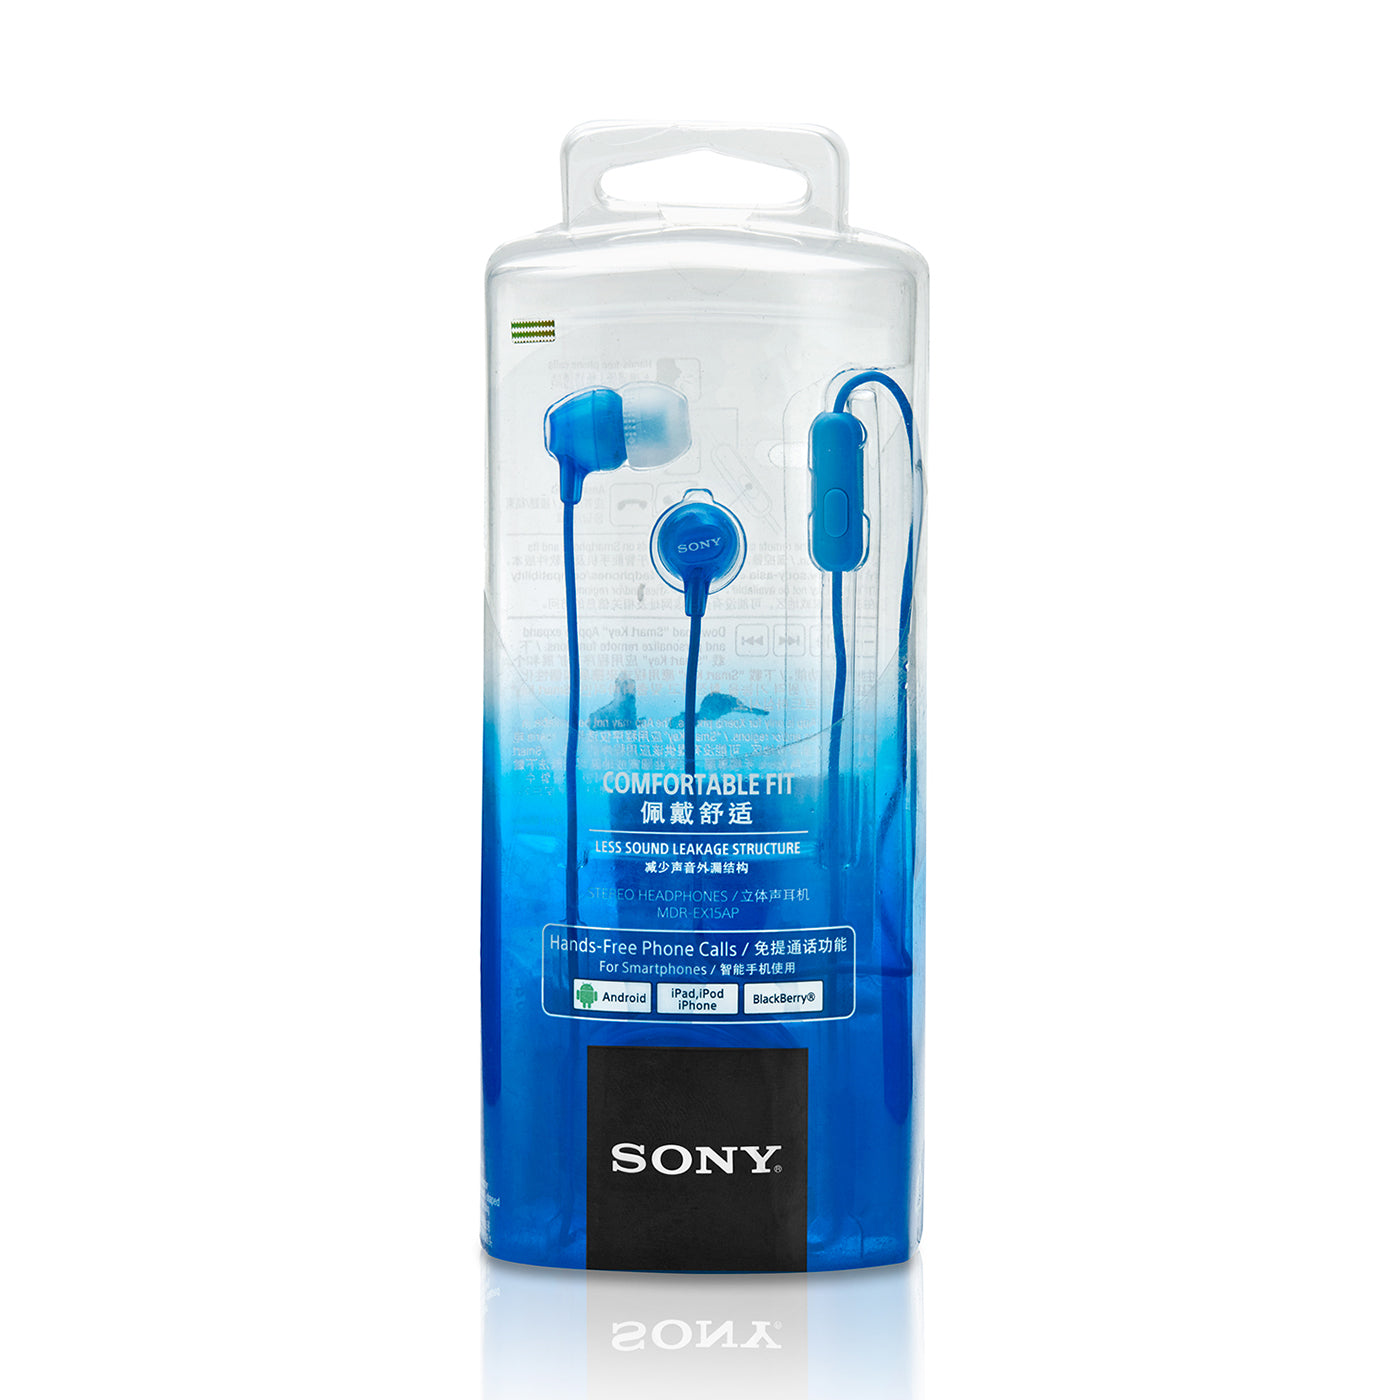 Sony MDR-EX15AP In-Ear Stereo Headphones with Mic